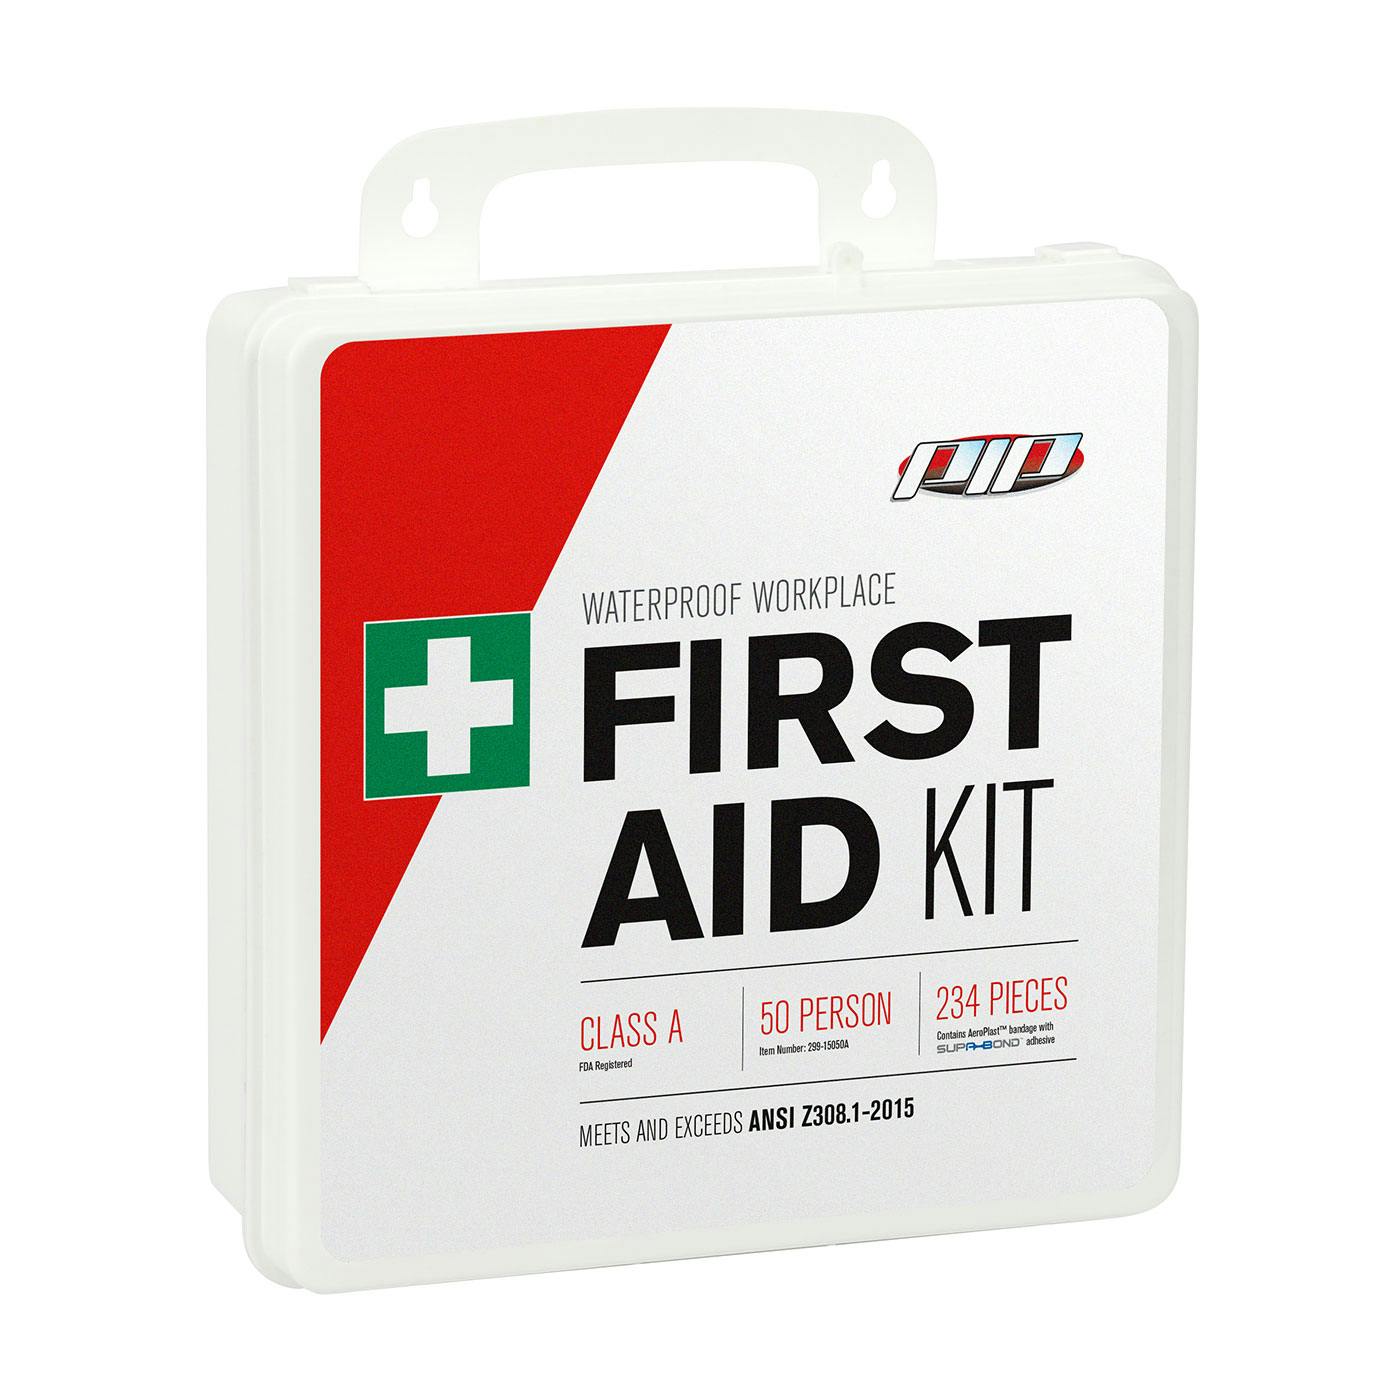 ANSI Class A Waterproof First Aid Kit - 50 Person, White (299-15050A) - KIT